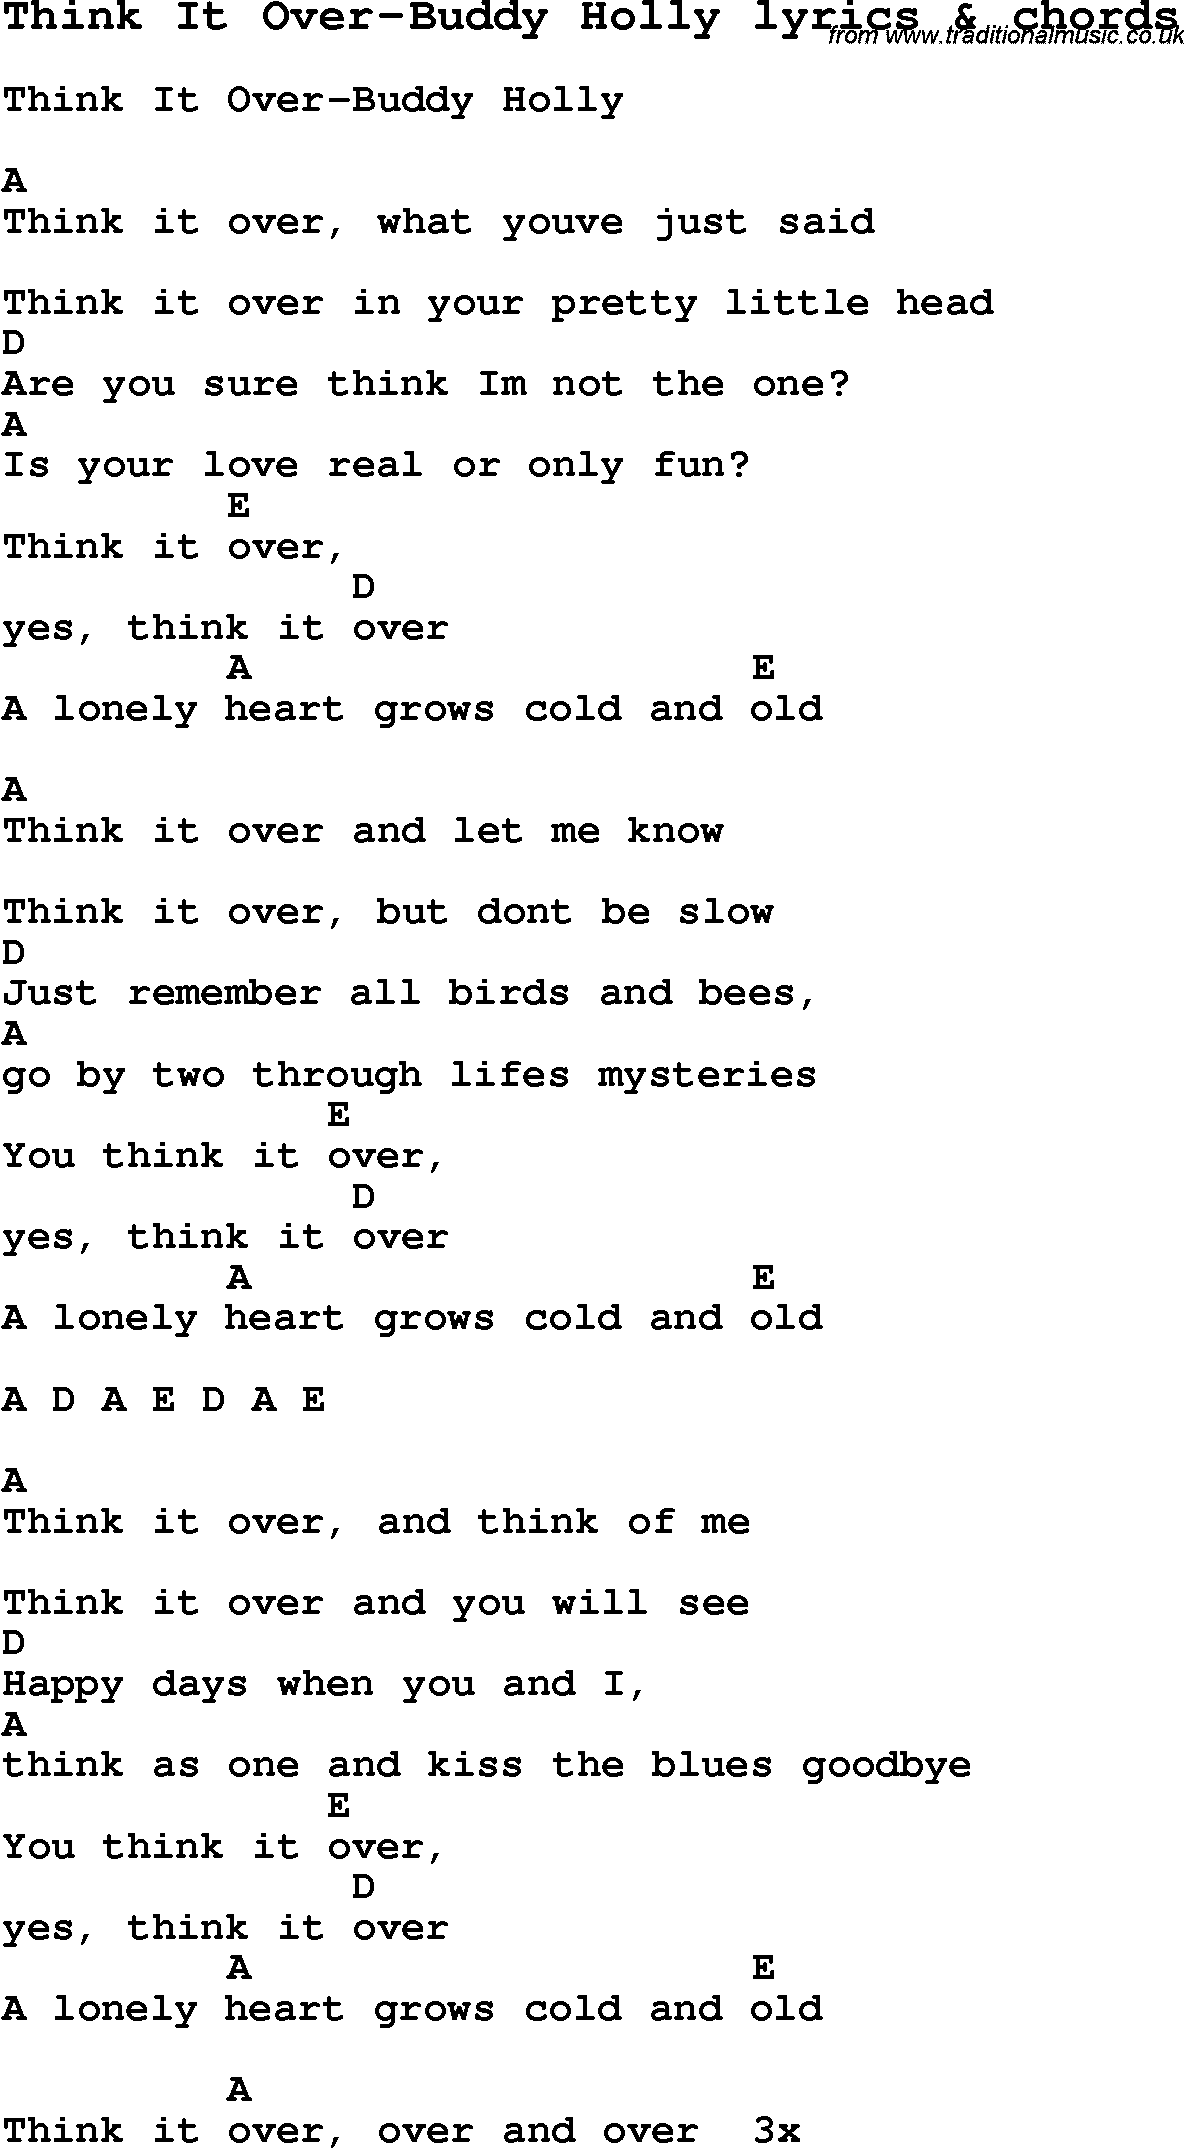 Love Song Lyrics for: Think It Over-Buddy Holly with chords for Ukulele, Guitar Banjo etc.